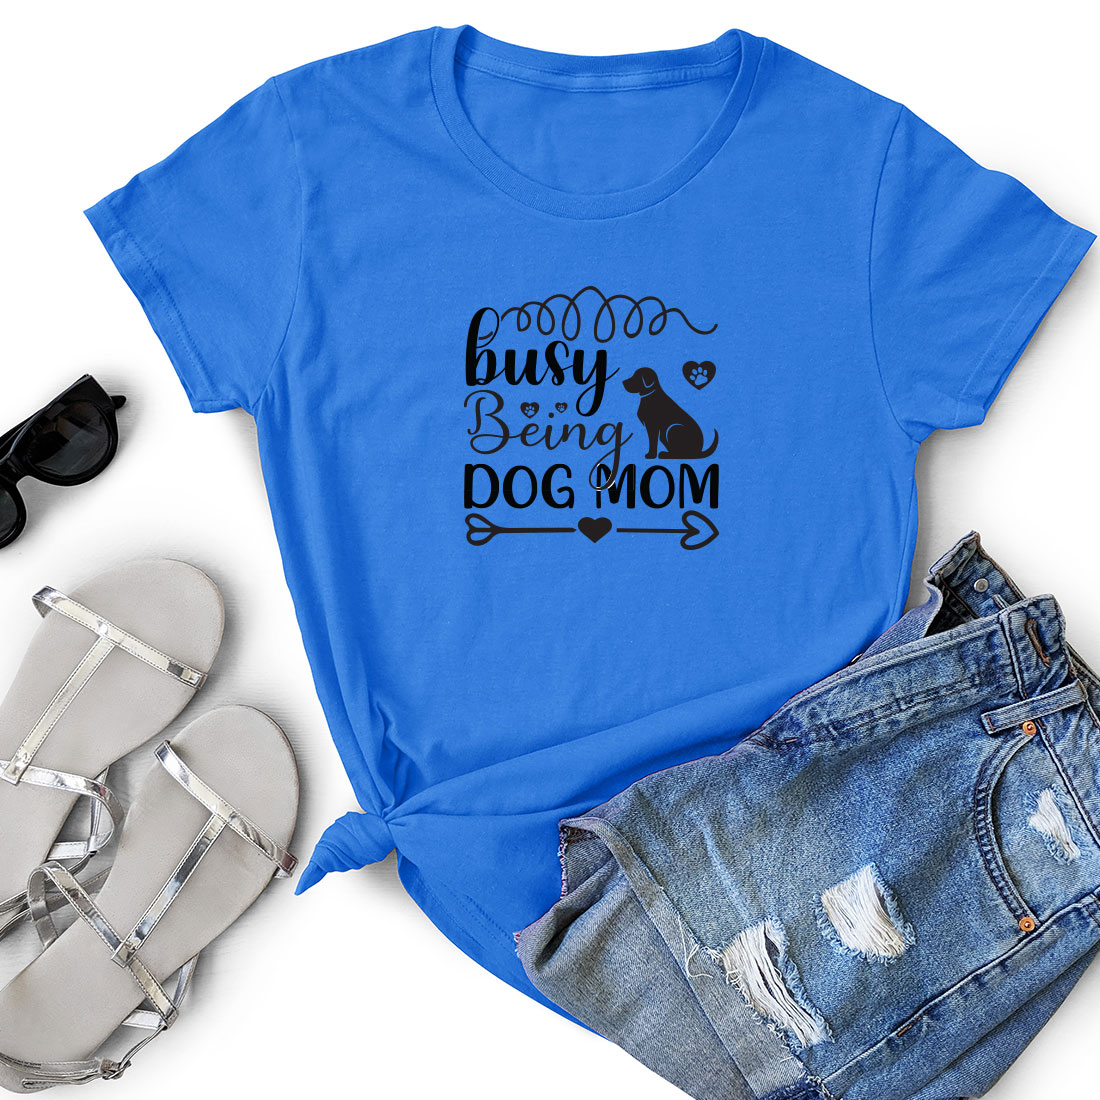 Blue shirt with a dog mom on it.